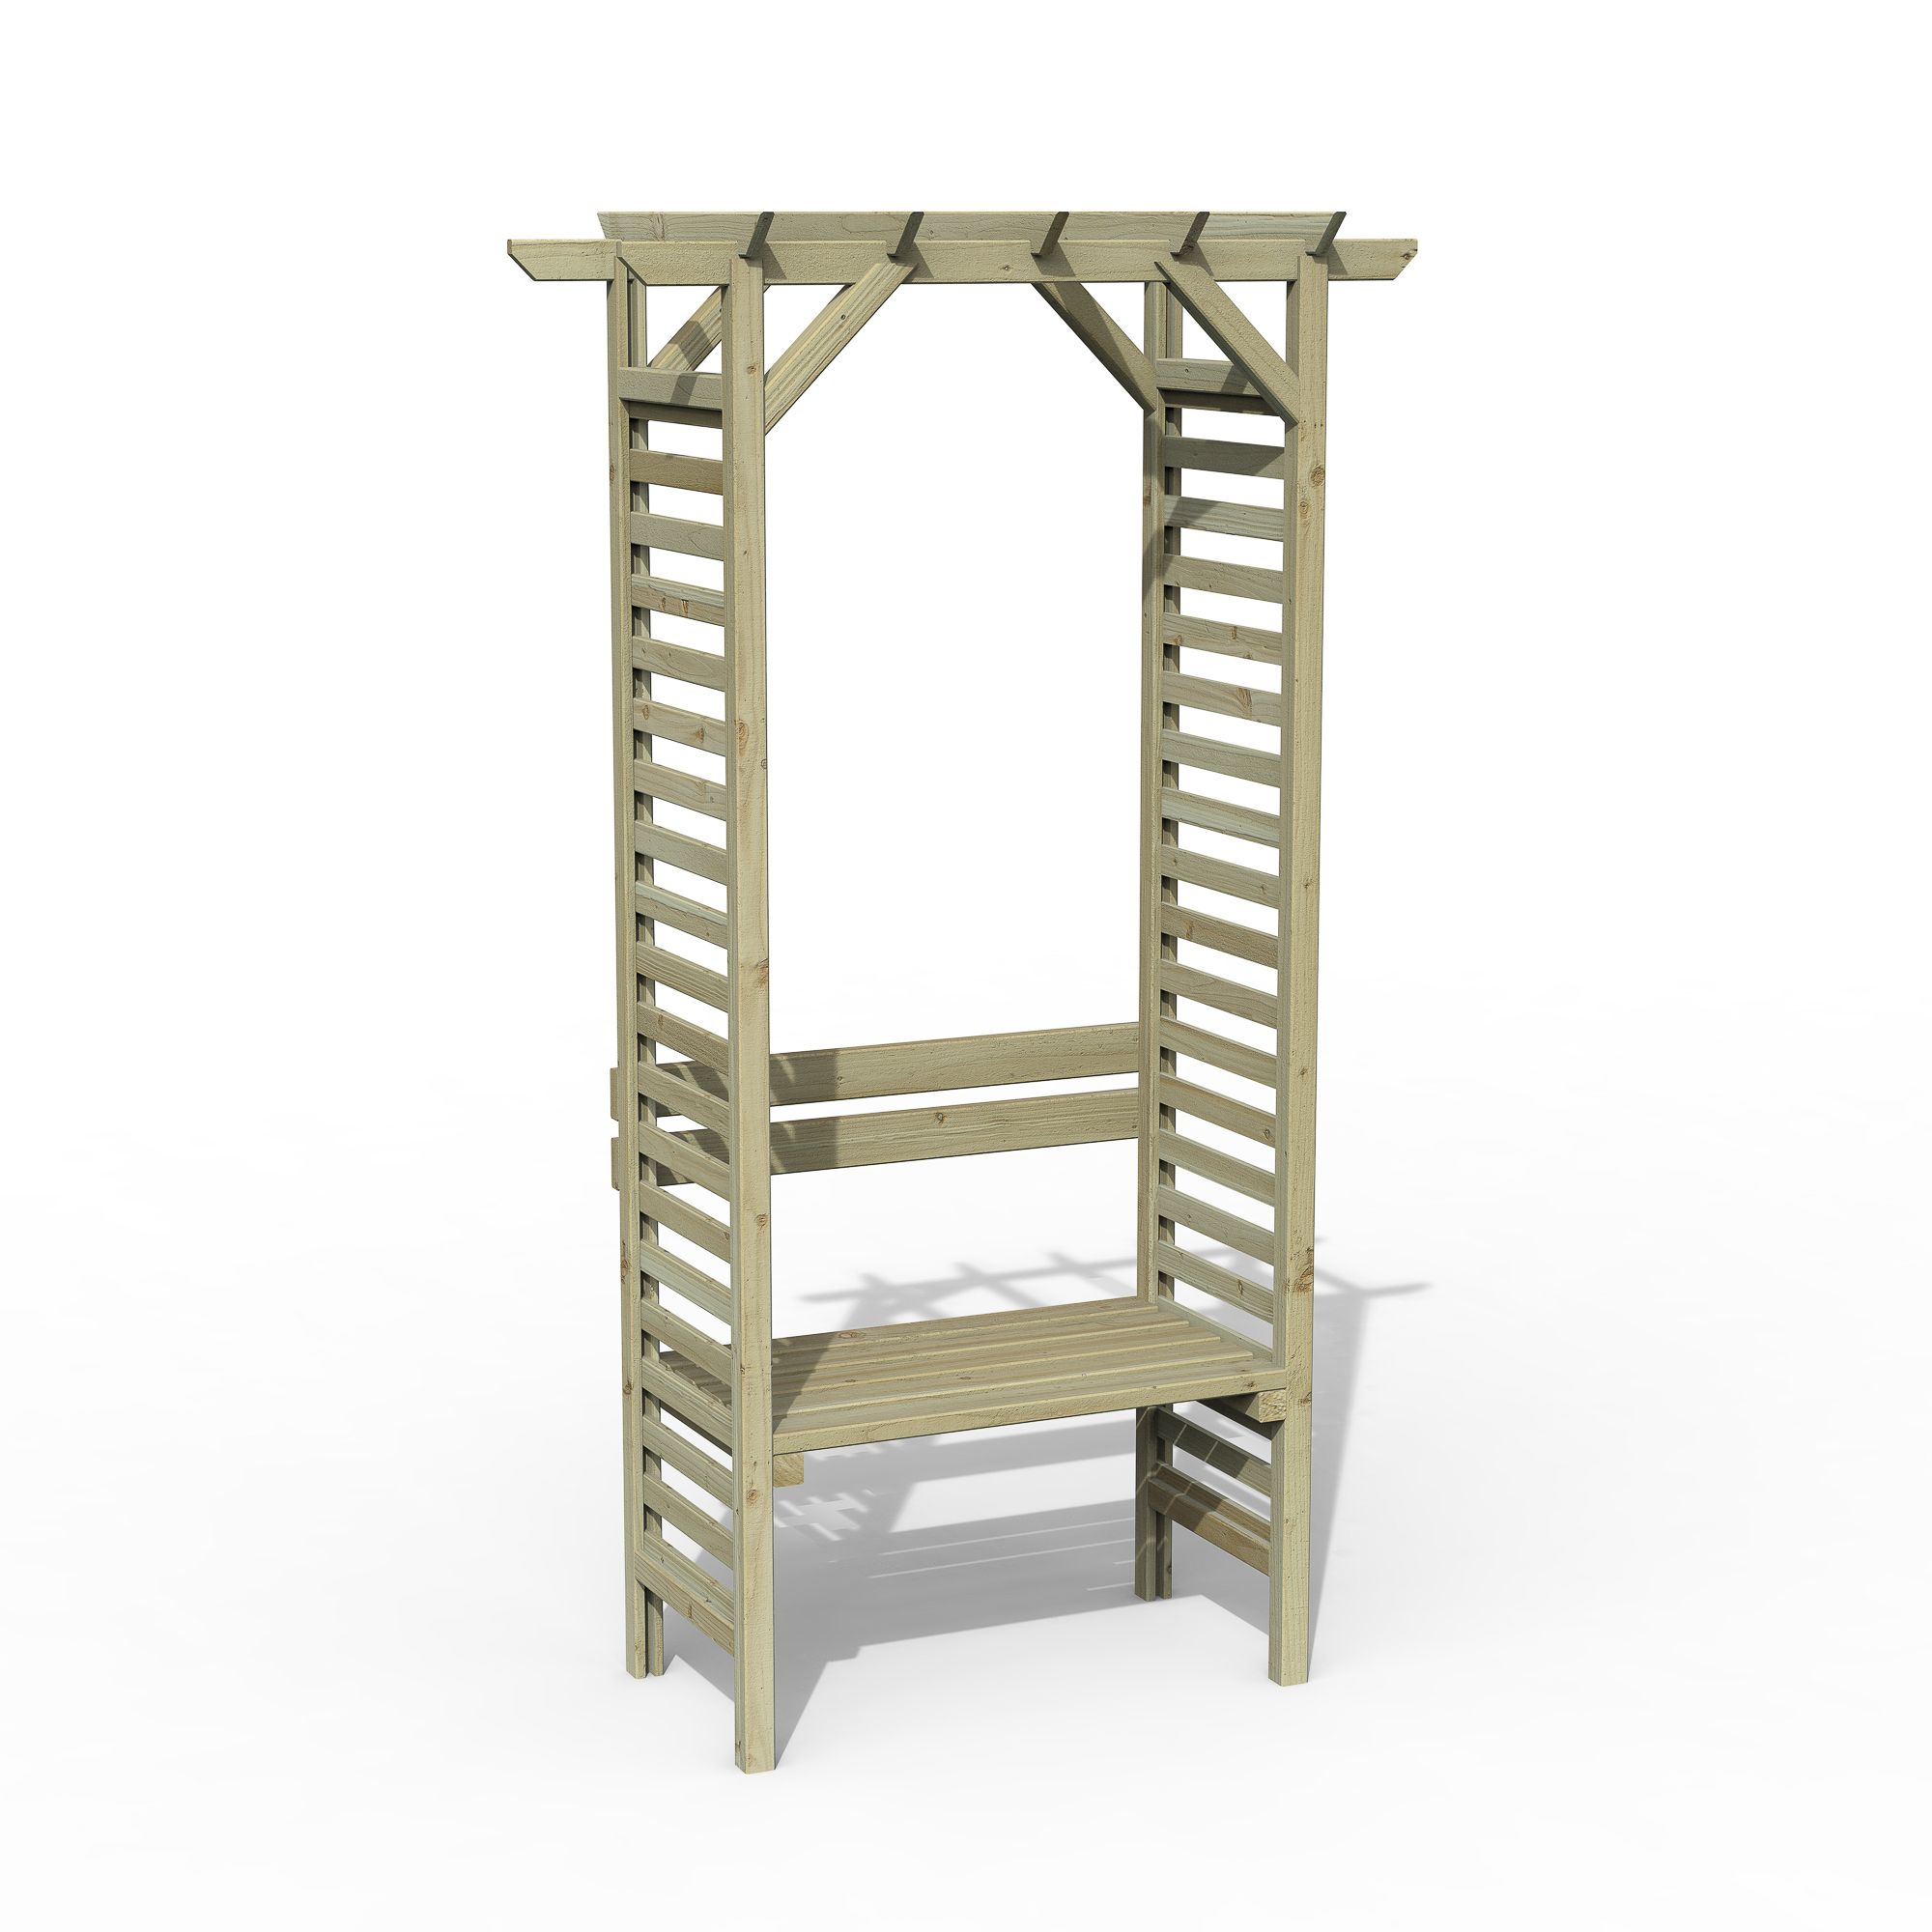 Forest Garden Palma Arbour, (H)2151mm (W)1200mm (D)620mm - Assembly required